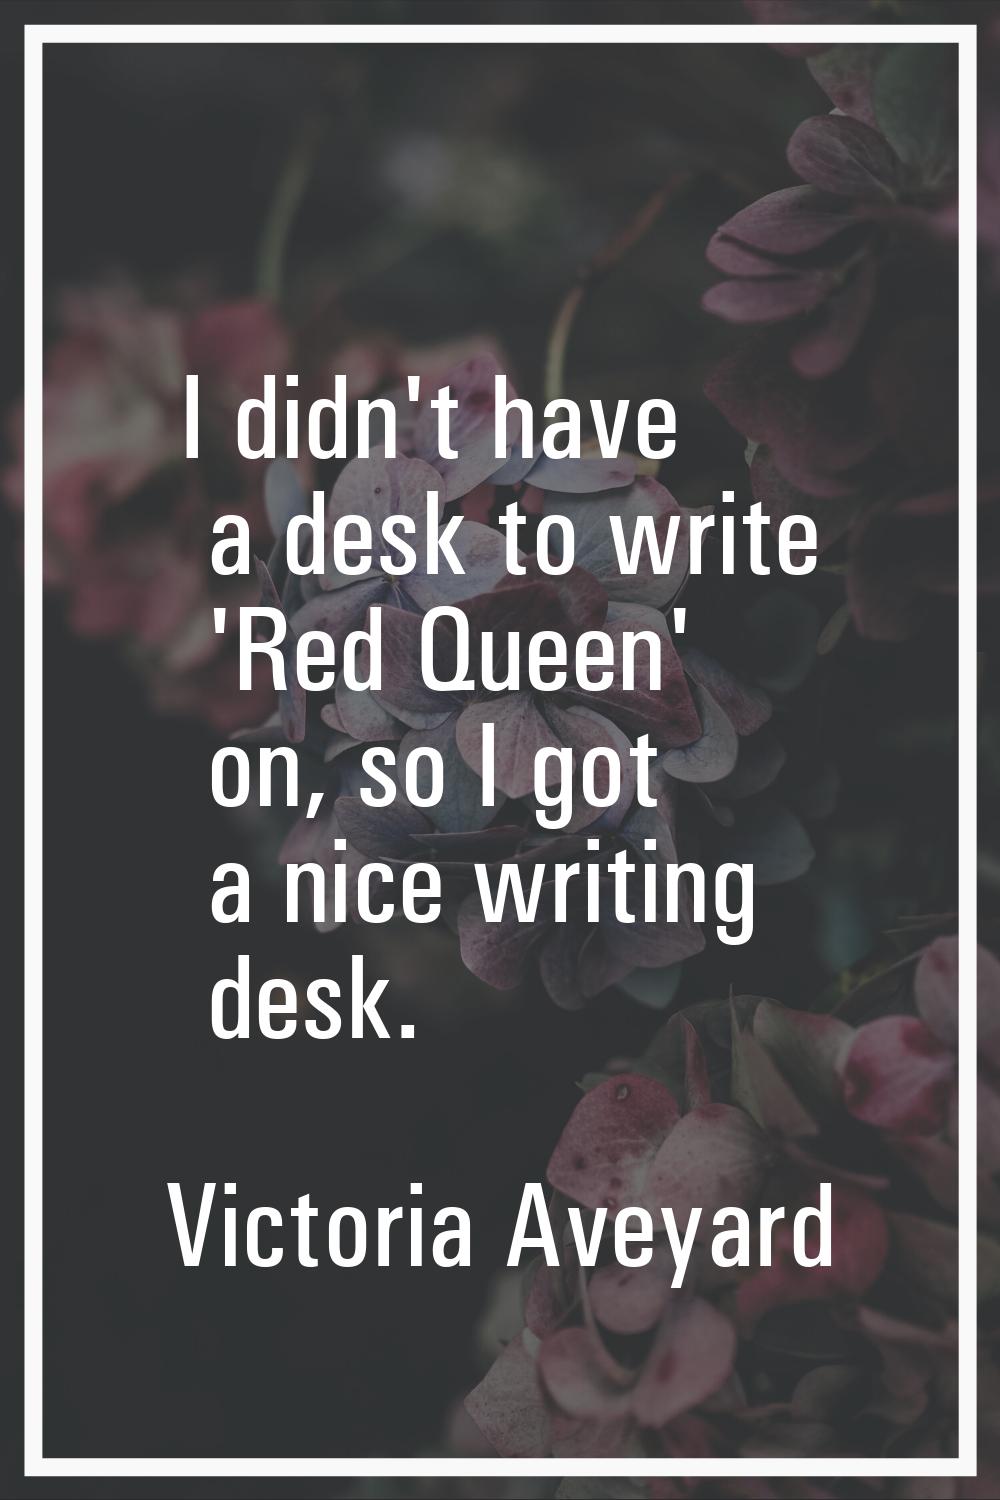 I didn't have a desk to write 'Red Queen' on, so I got a nice writing desk.